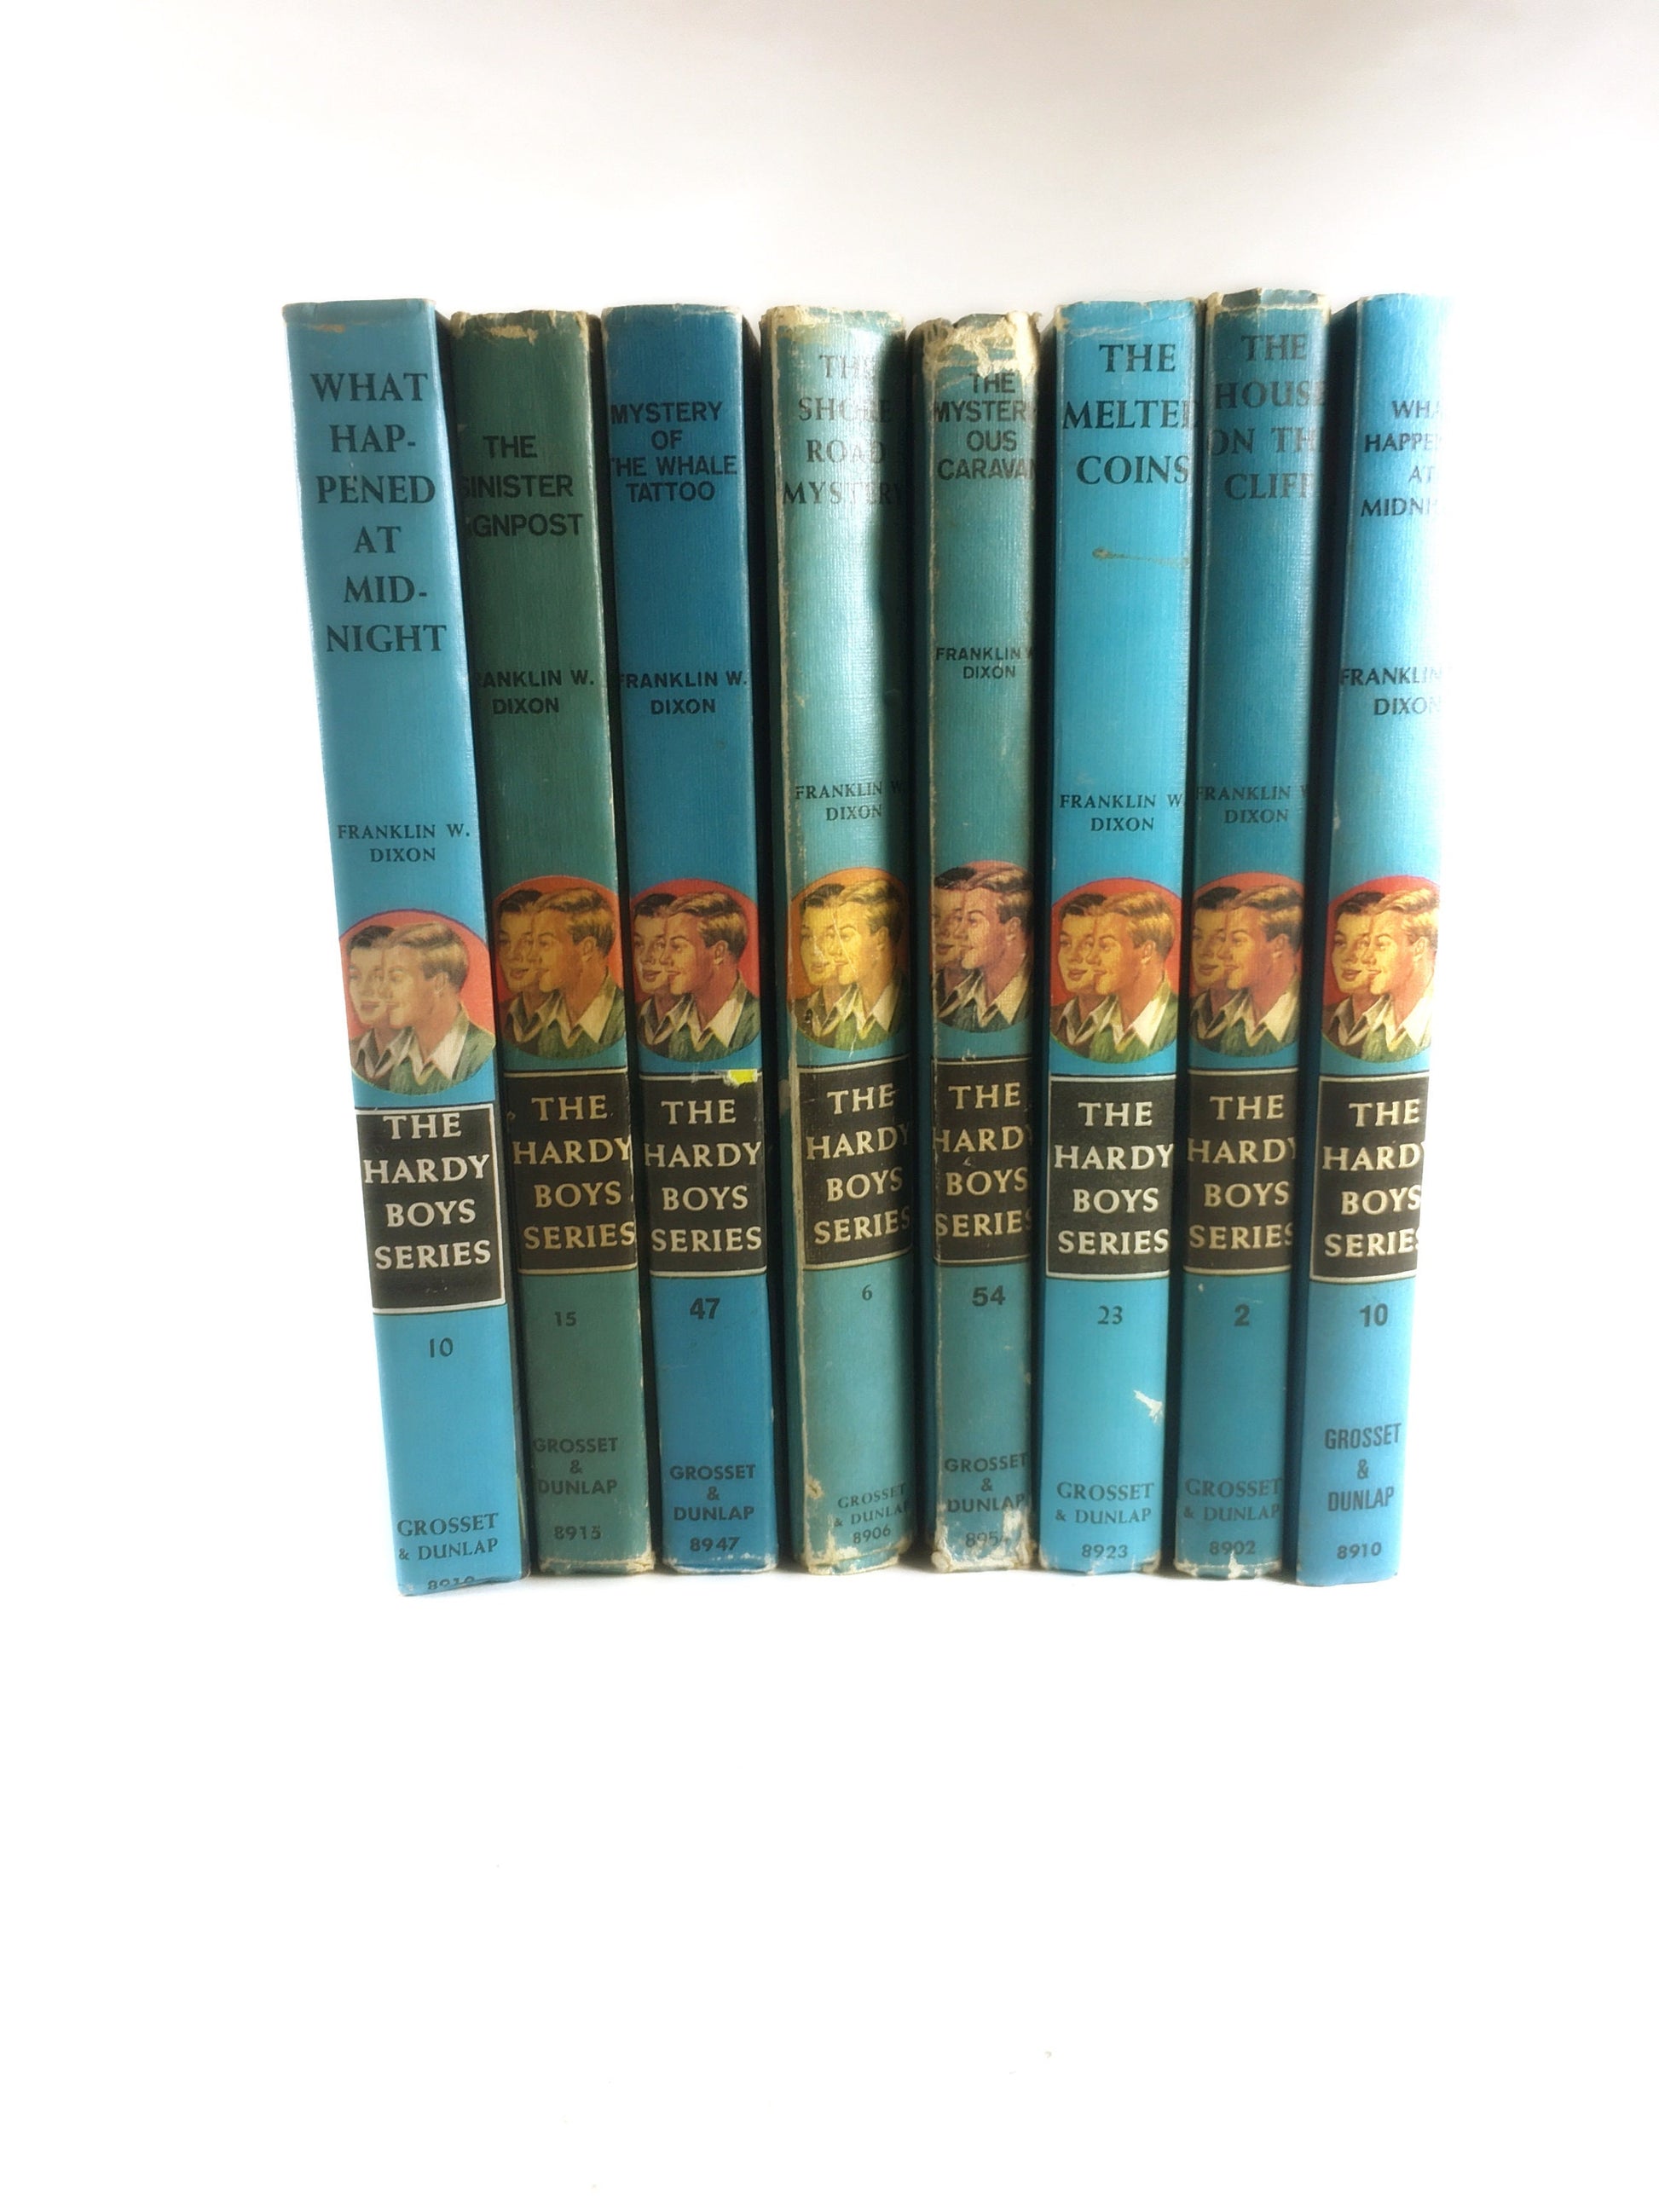 Hardy Boys vintage book lot circa 1950s 1960s 1970s by Franklin Dixon Picture cover books. Blue tween teen mystery series home reading